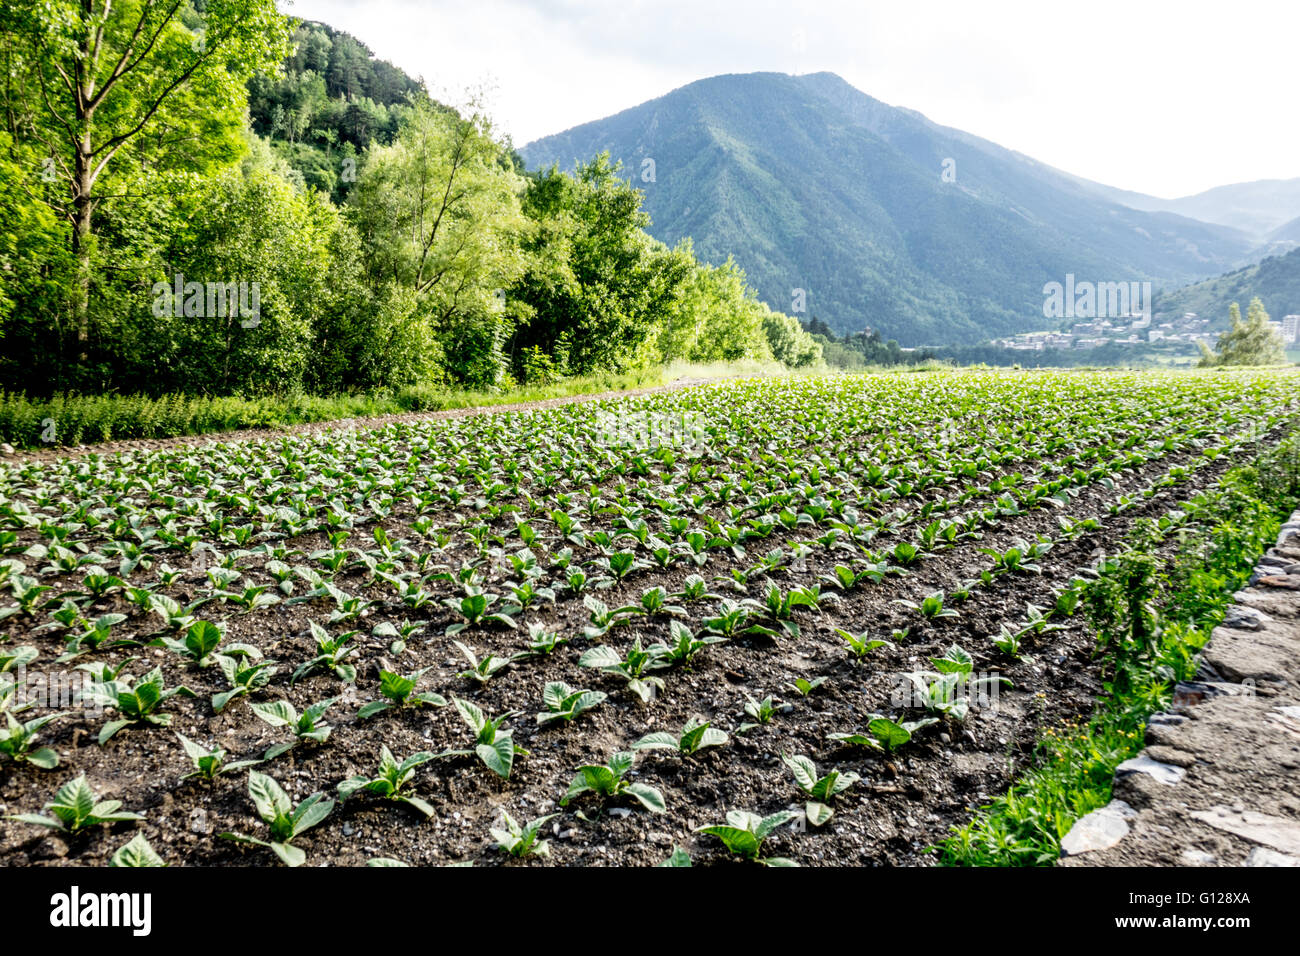 Tobacco growing in Anyos, Andorra Stock Photo: 103927778 - Alamy